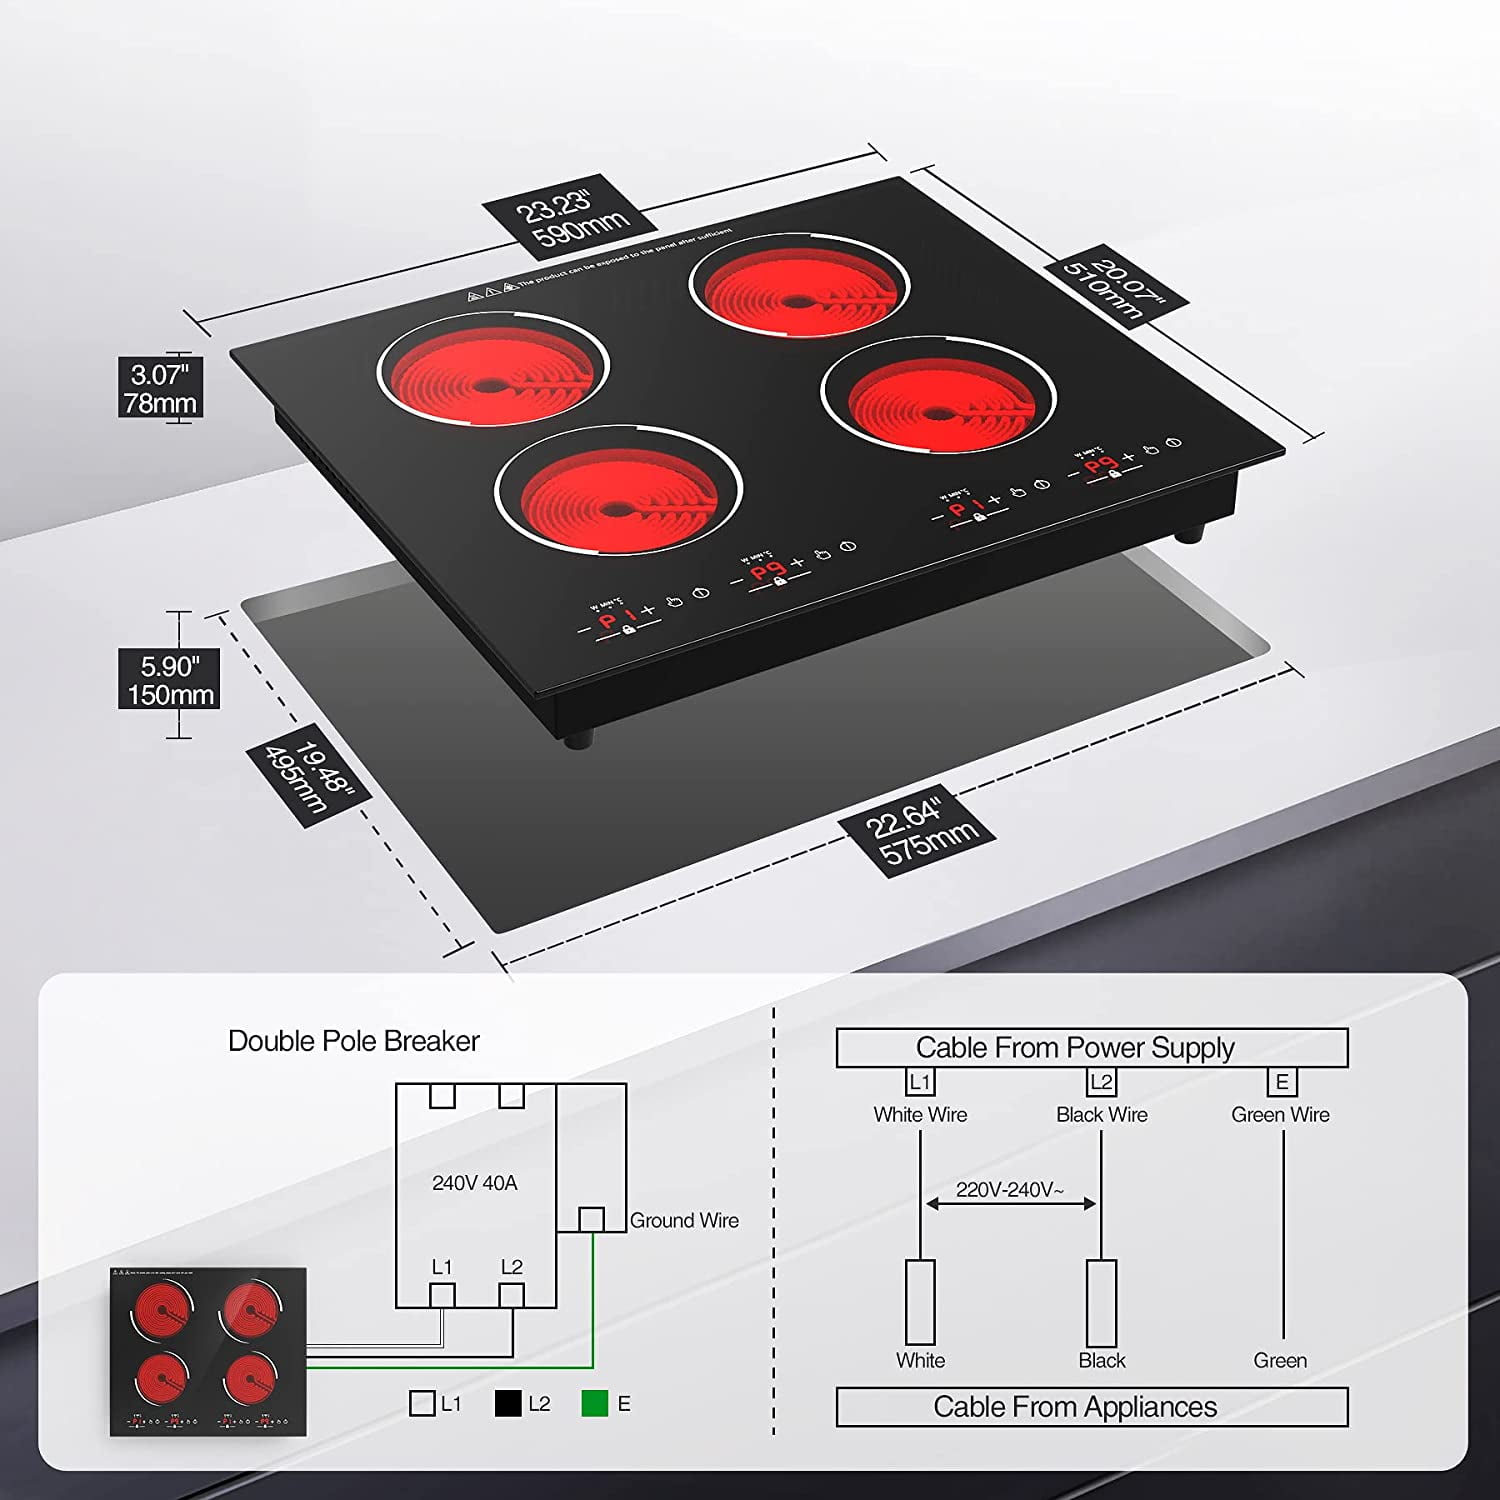 VBGK Electric Cooktop 5 Burner 36 inch Electric Stove 8600W Countertop and  Built-in Hot Plate for Cooking,99 Minutes Timer Electric Stove Top 220v  without Plug Compatible with All Cookware 